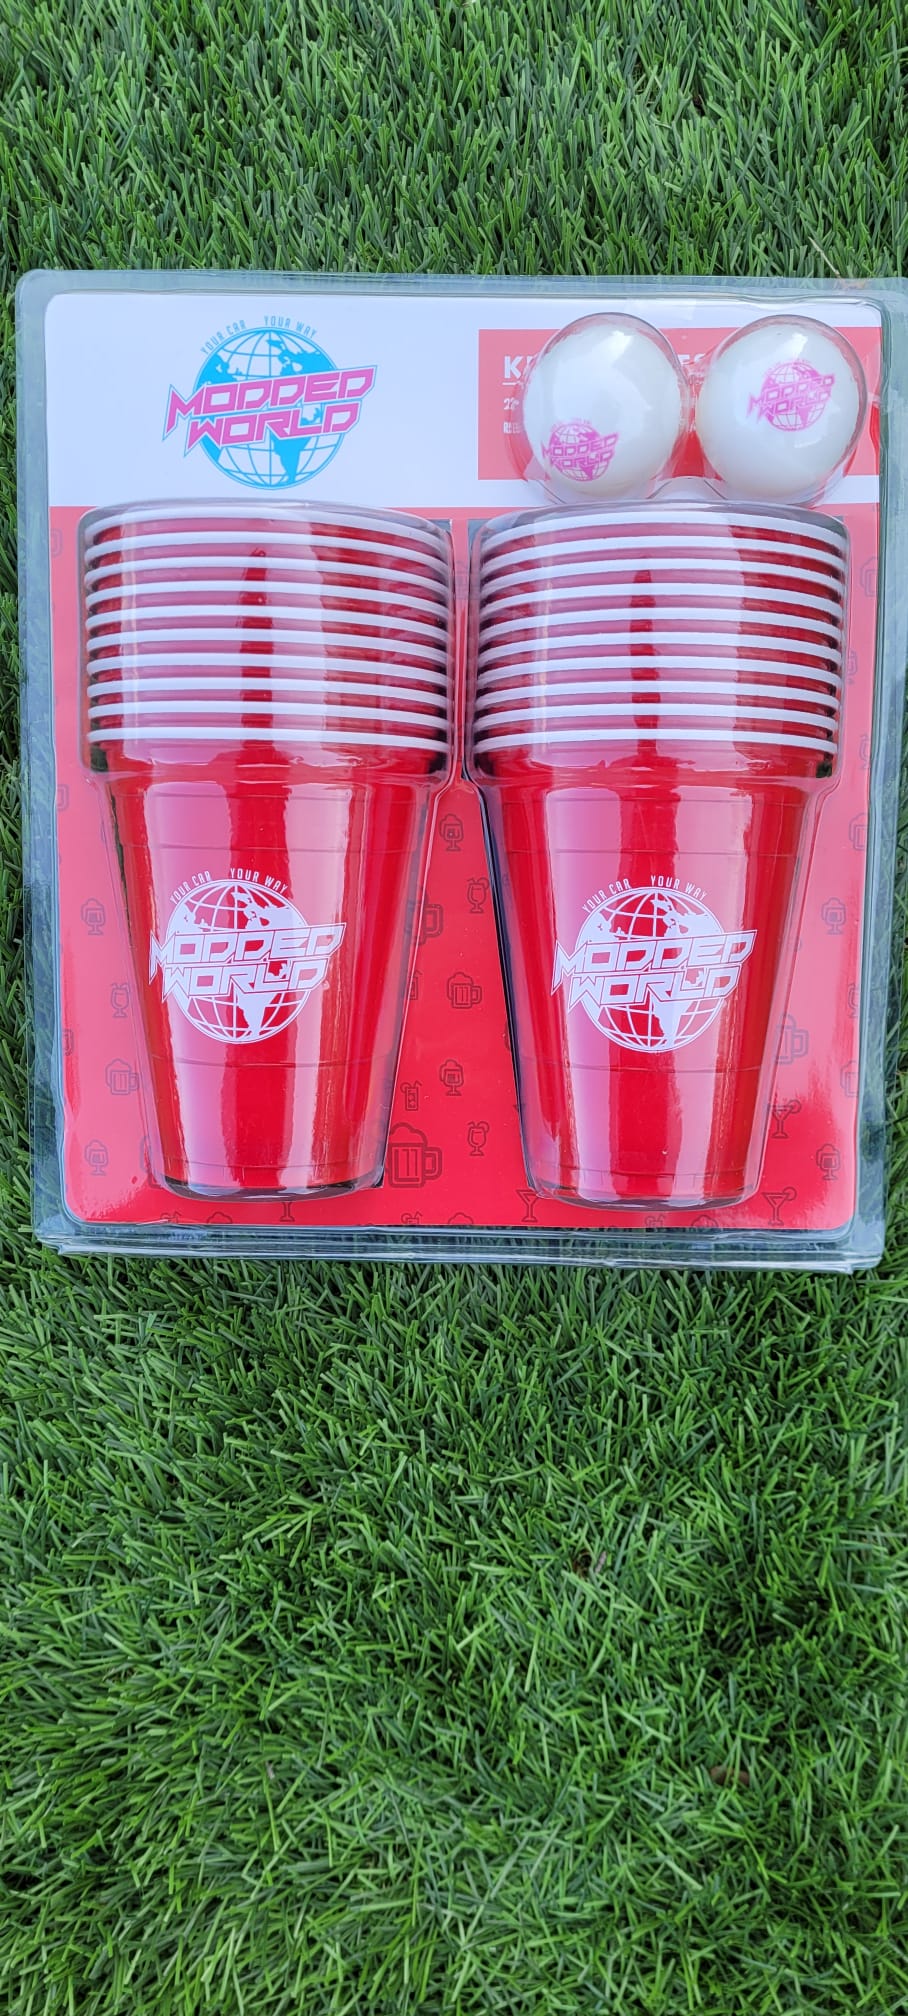 CUP PONG GAME KIT - MODDED WORLD EDITION